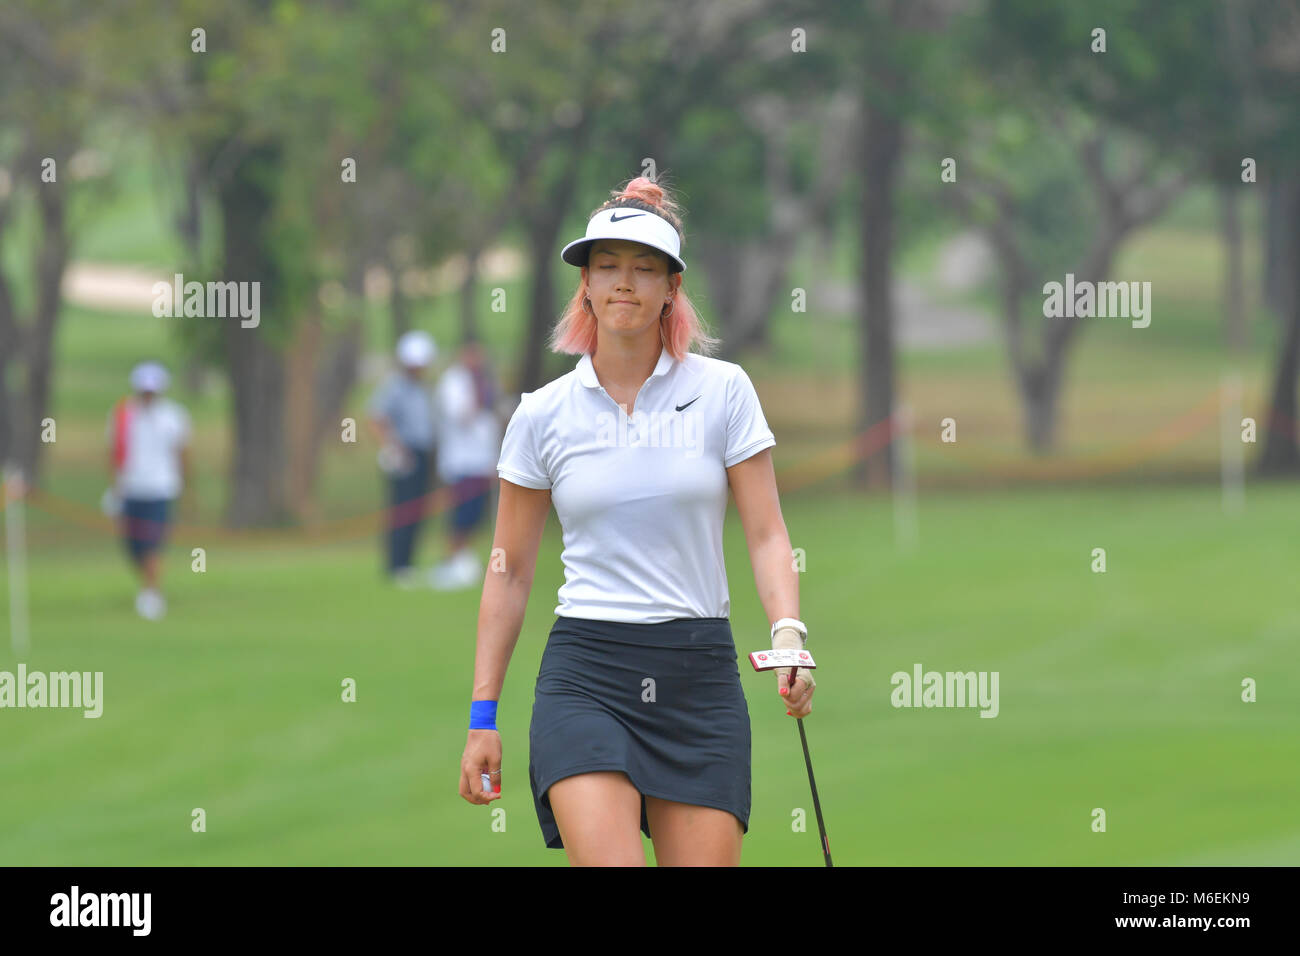 Michelle Wie of USA in Honda LPGA Thailand 2018 at Siam Country Club, Old Course on February 24, 2018 in Pattaya Chonburi, Thailand. Stock Photo